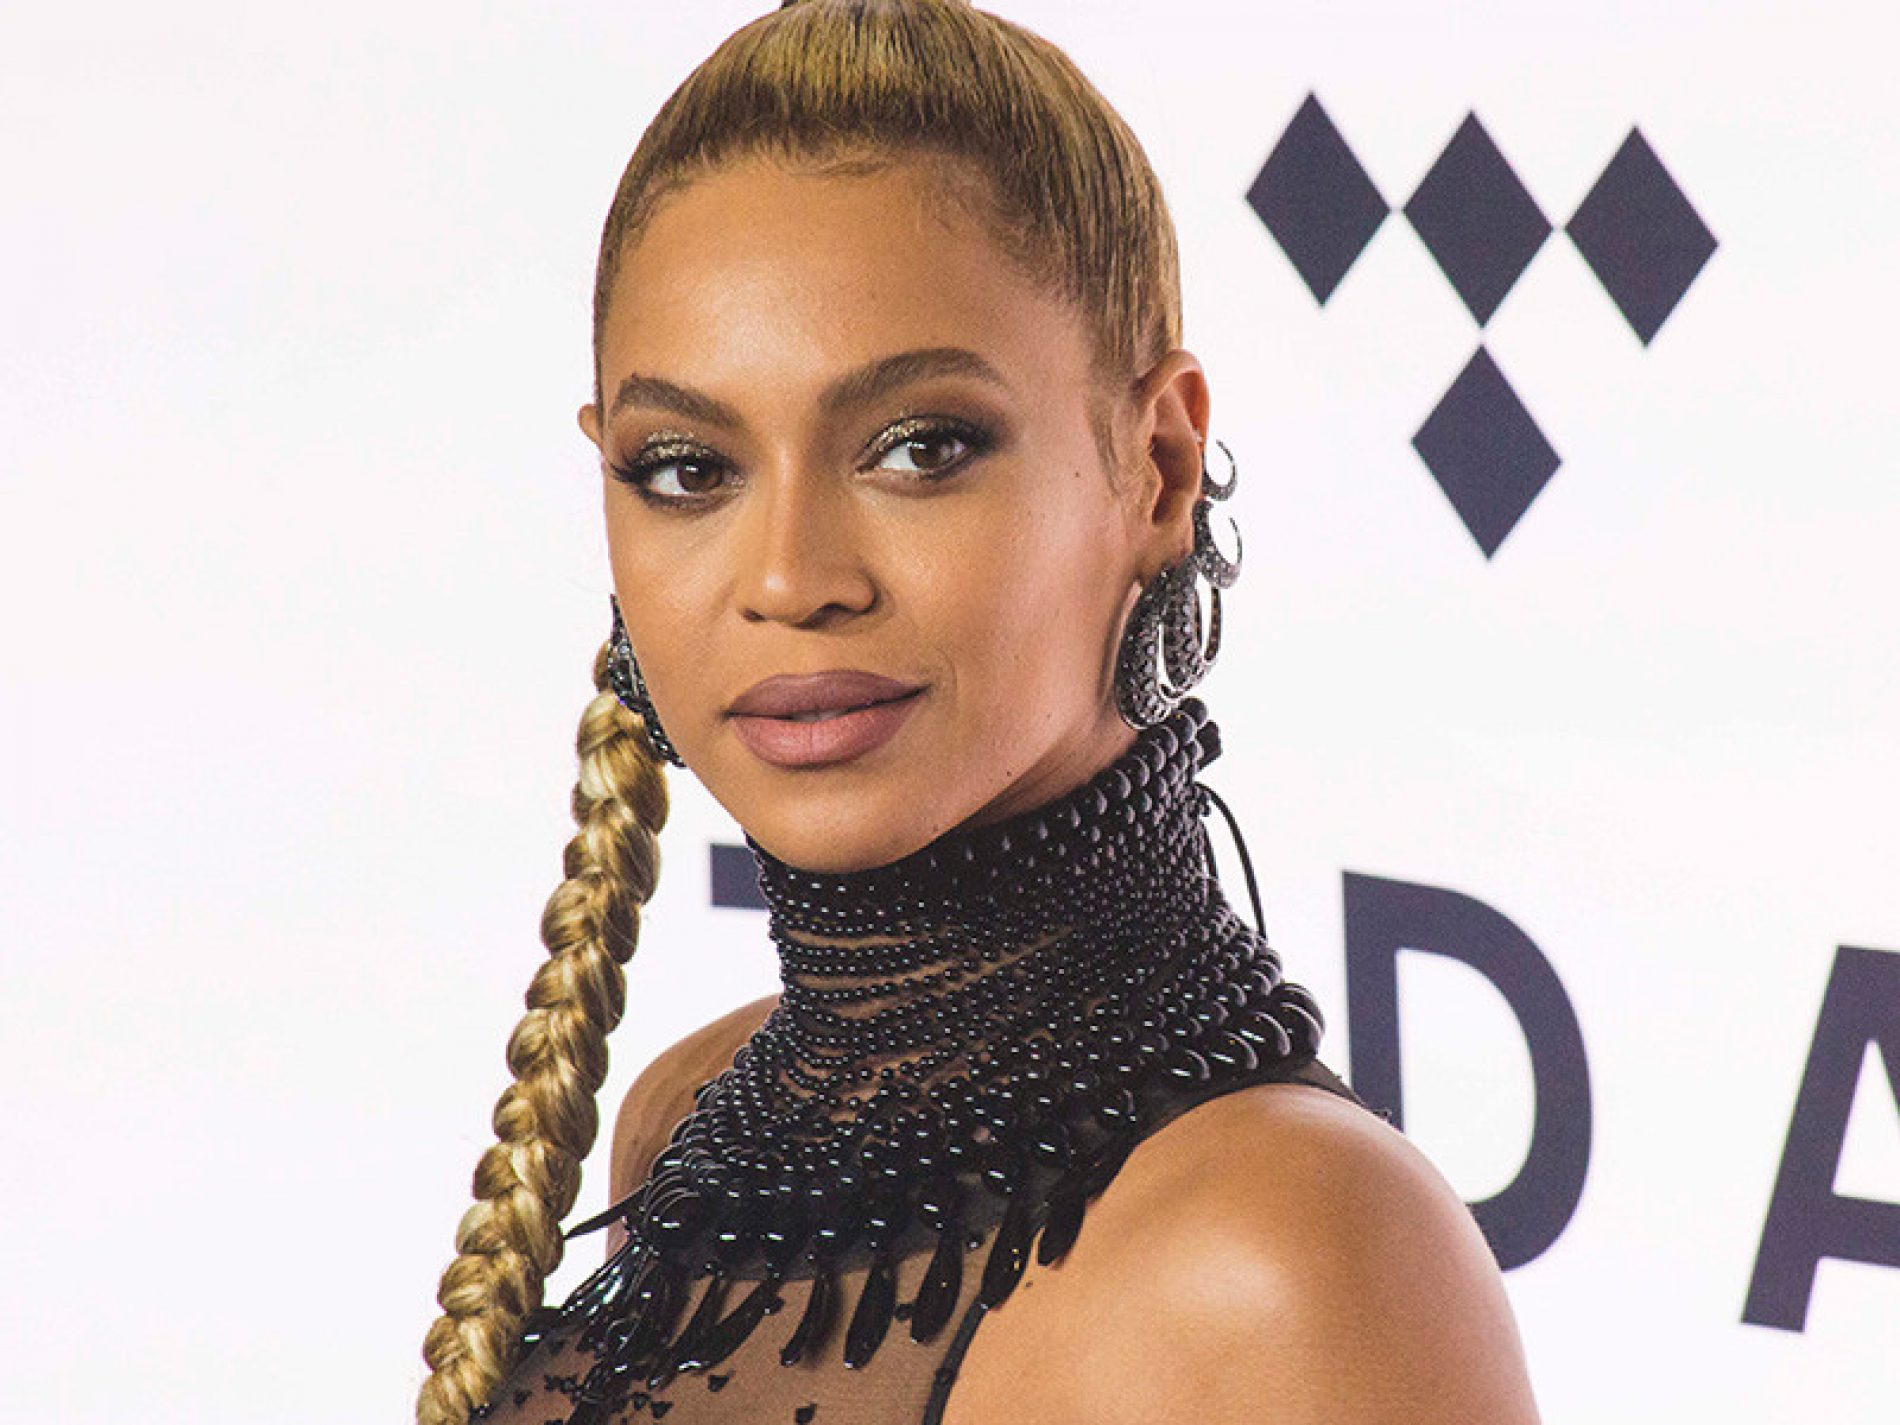 Some Scientist Had The Nerve To Rank Beyoncé As The Second Most Beautiful Woman On Earth